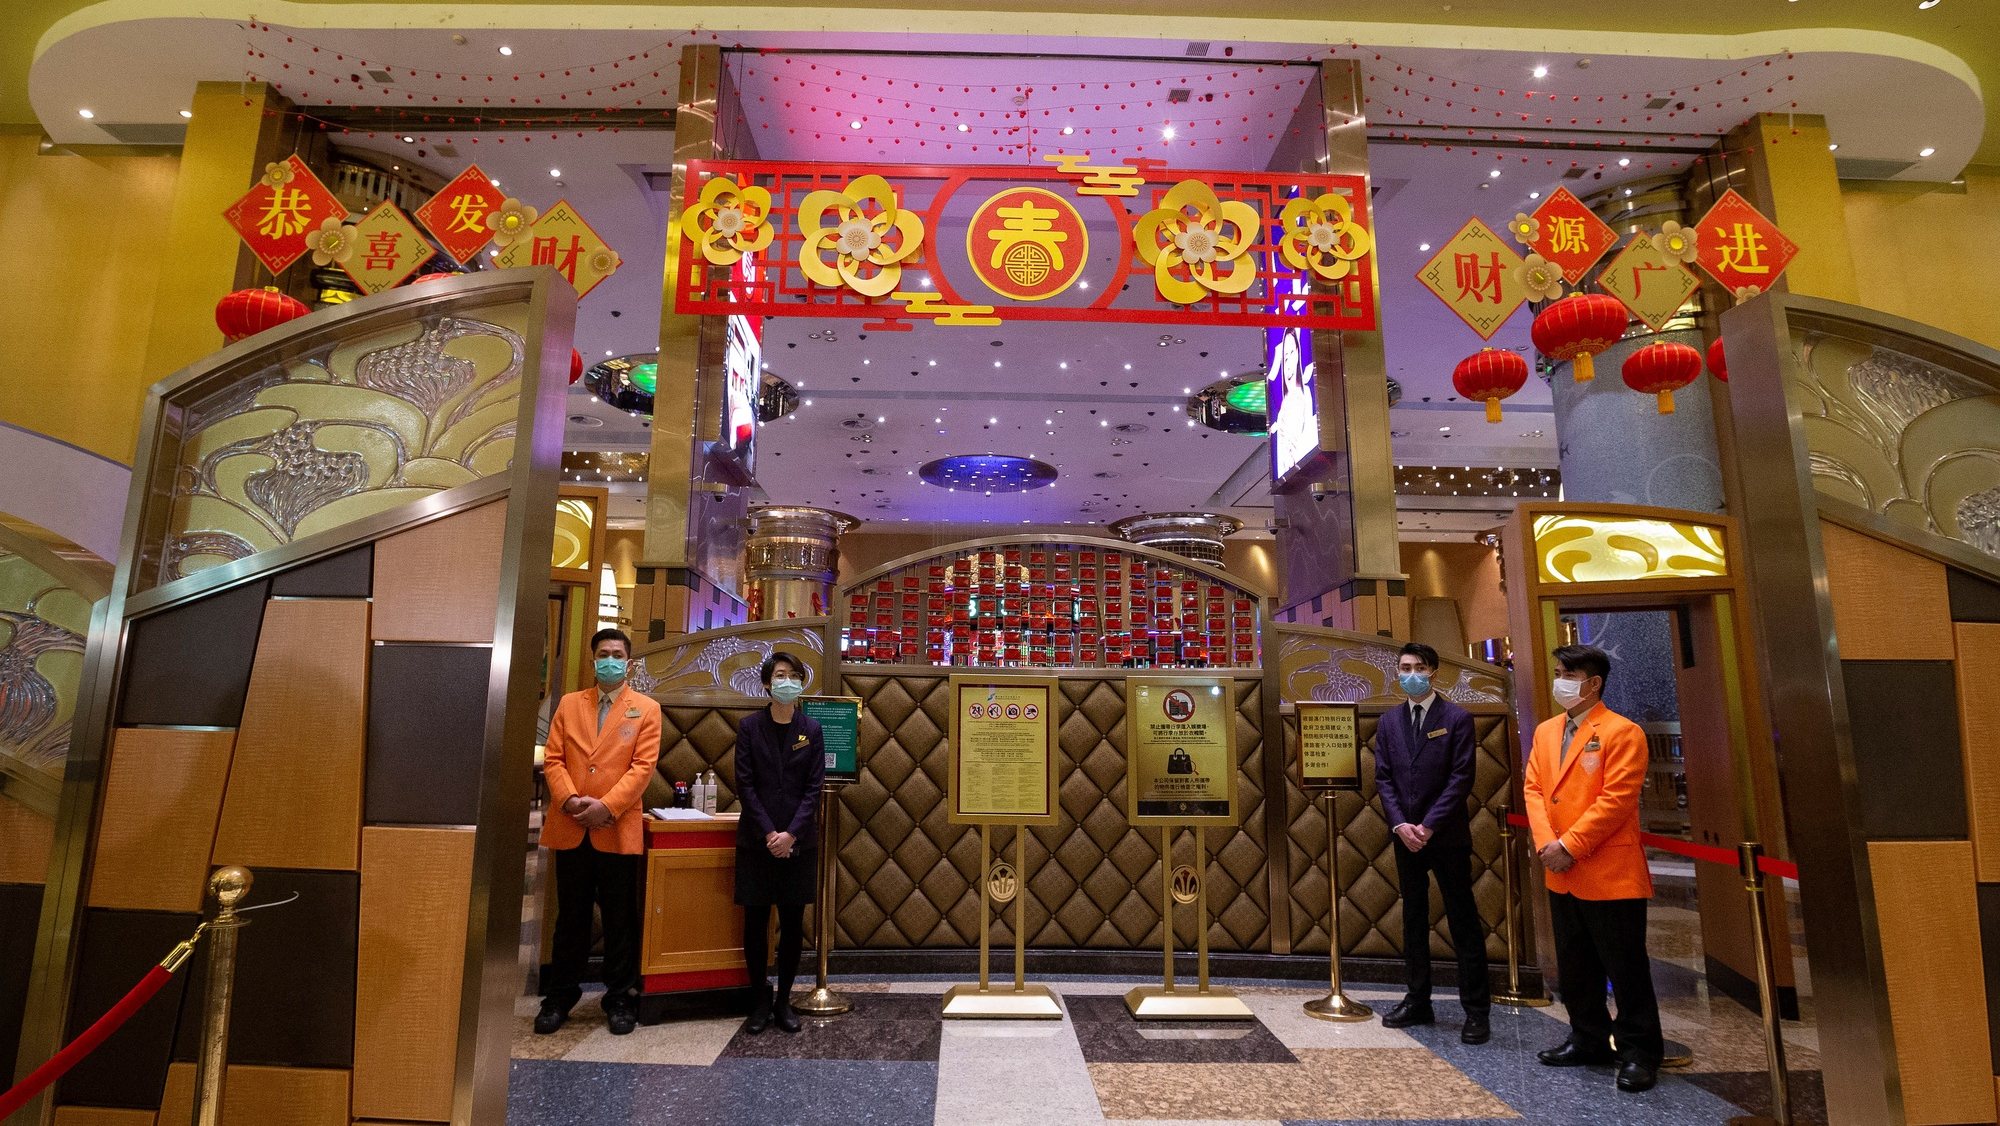 epa08228734 Casino workers wearing protective masks await customers as the Casino reopens in Macao, China, 20 February 2020. Twenty-nine casinos are to reopen starting 20 February, and 12 remain closed, the authorities of the gambling capital said, one of the regions that have identified cases of infection by the coronavirus Covid-19.  After 15 days of closure, Macau&#039;s government said on 17 February that the casinos could reopen, giving operators 30 days to return to business.  EPA/CARMO CORREIA